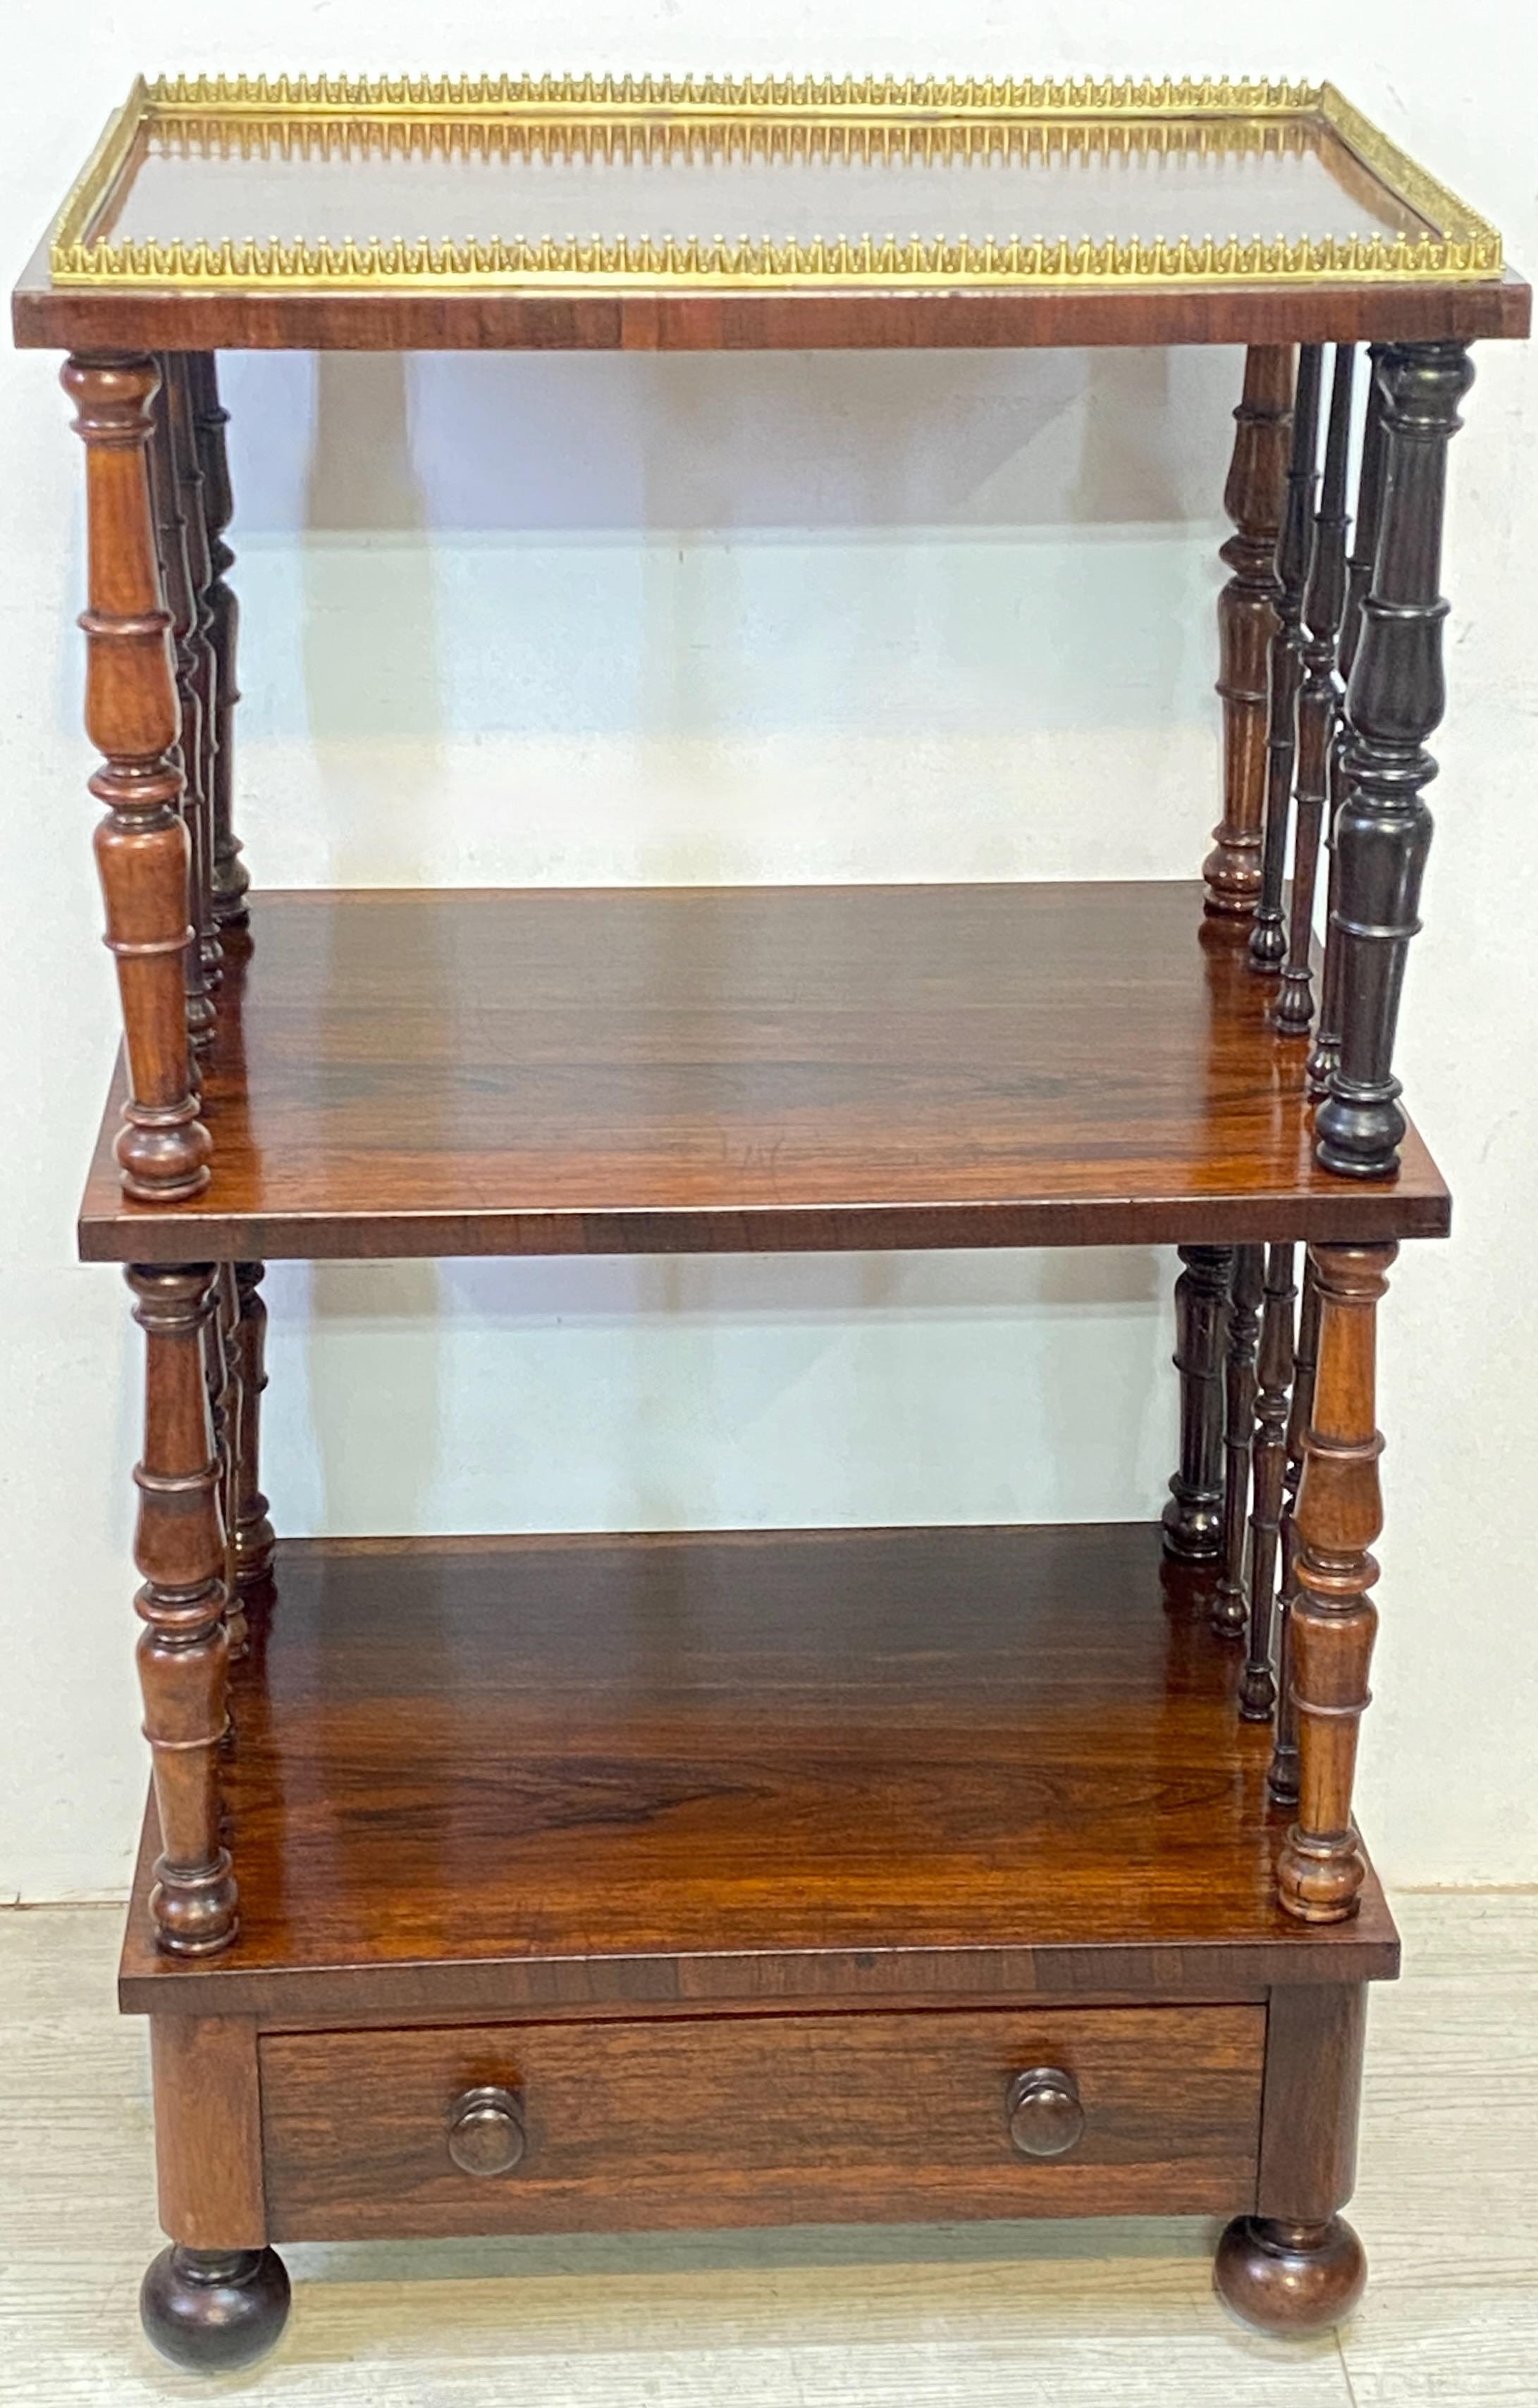 English Regency period rosewood and walnut silent butler serving table with shelves, a brass gallery around the top, and a single drawer.
Retains old if not original finish.
In beautiful antique condition.
England, circa 1830.


